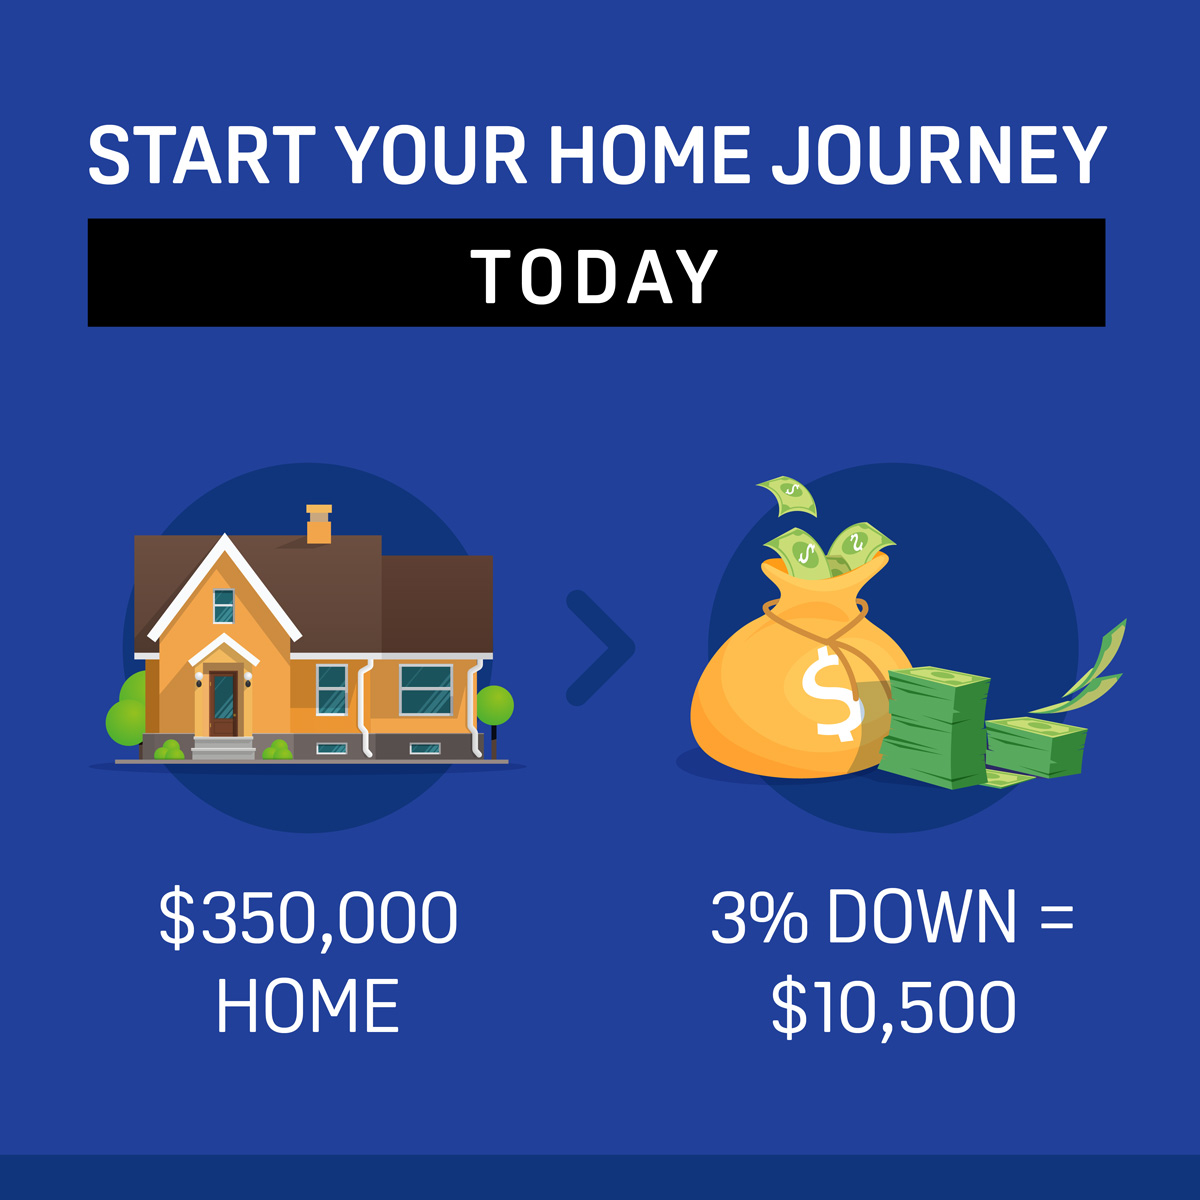 If you've saved up a little, we can help you get a lot! With down payments starting at just 3% on multiple loan options, we make homeownership accessible for all!
*
*
*
#mortgage #thesimpleloangroup #uwm #brokersarebetter #barrettfinancial #realestate #america #cashcoasttocoast